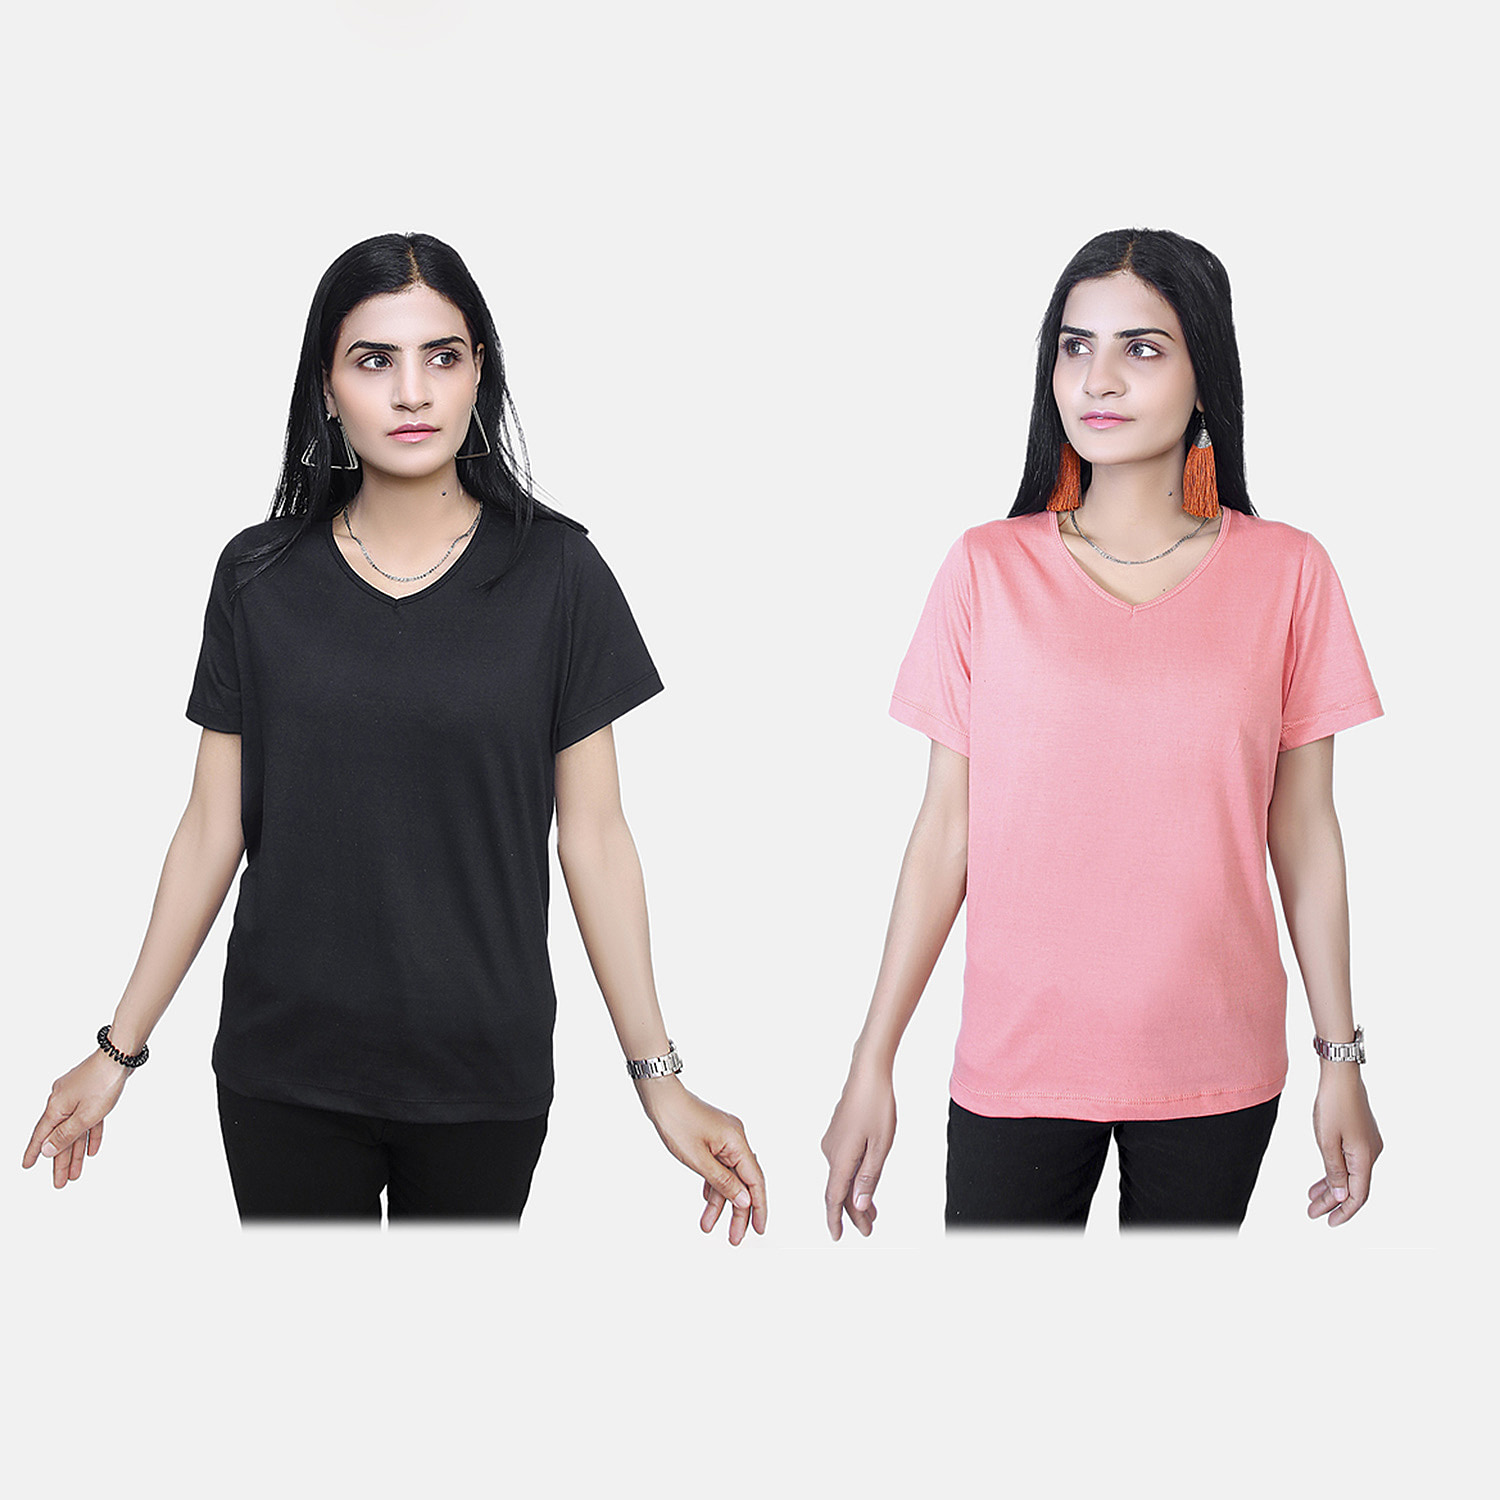 TAMSY Set of 2 Short Sleeve Classic V Neck Cotton Blend T-Shirt (Size S) - Black & Coral